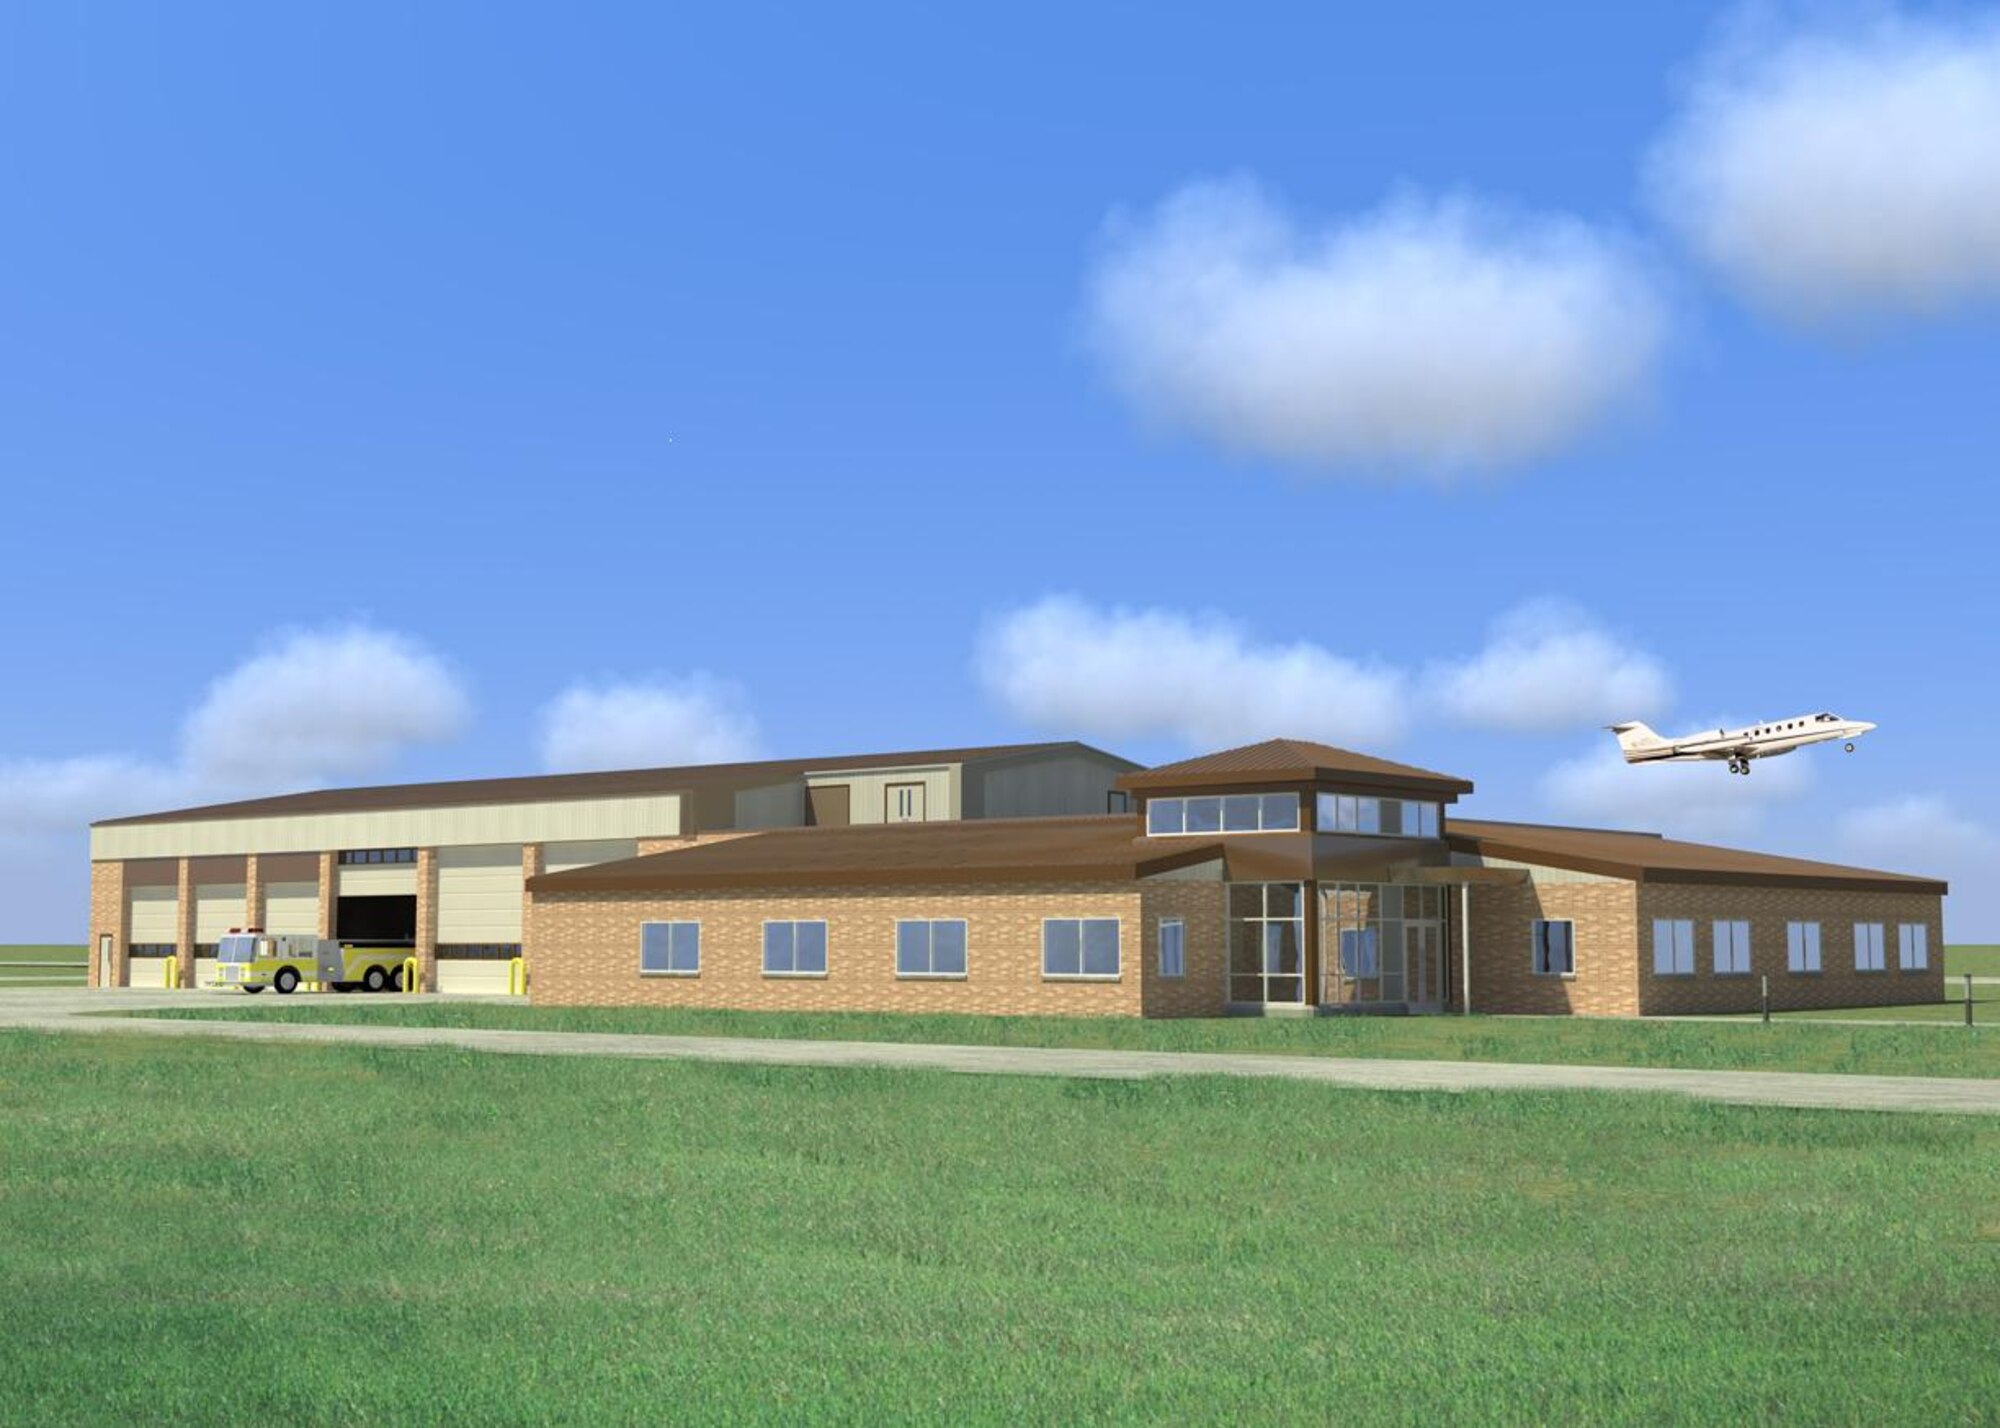 Entrance design of the new 119th Wing fire, crash and rescue station that will be built at the North Dakota Air National Guard base in Fargo.  A groundbreaking ceremony for the new facility will take place on April 21.  T.F. Powers Construction Company will manage the construction and Zerr Berg Architects, Inc. designed the facility.  

